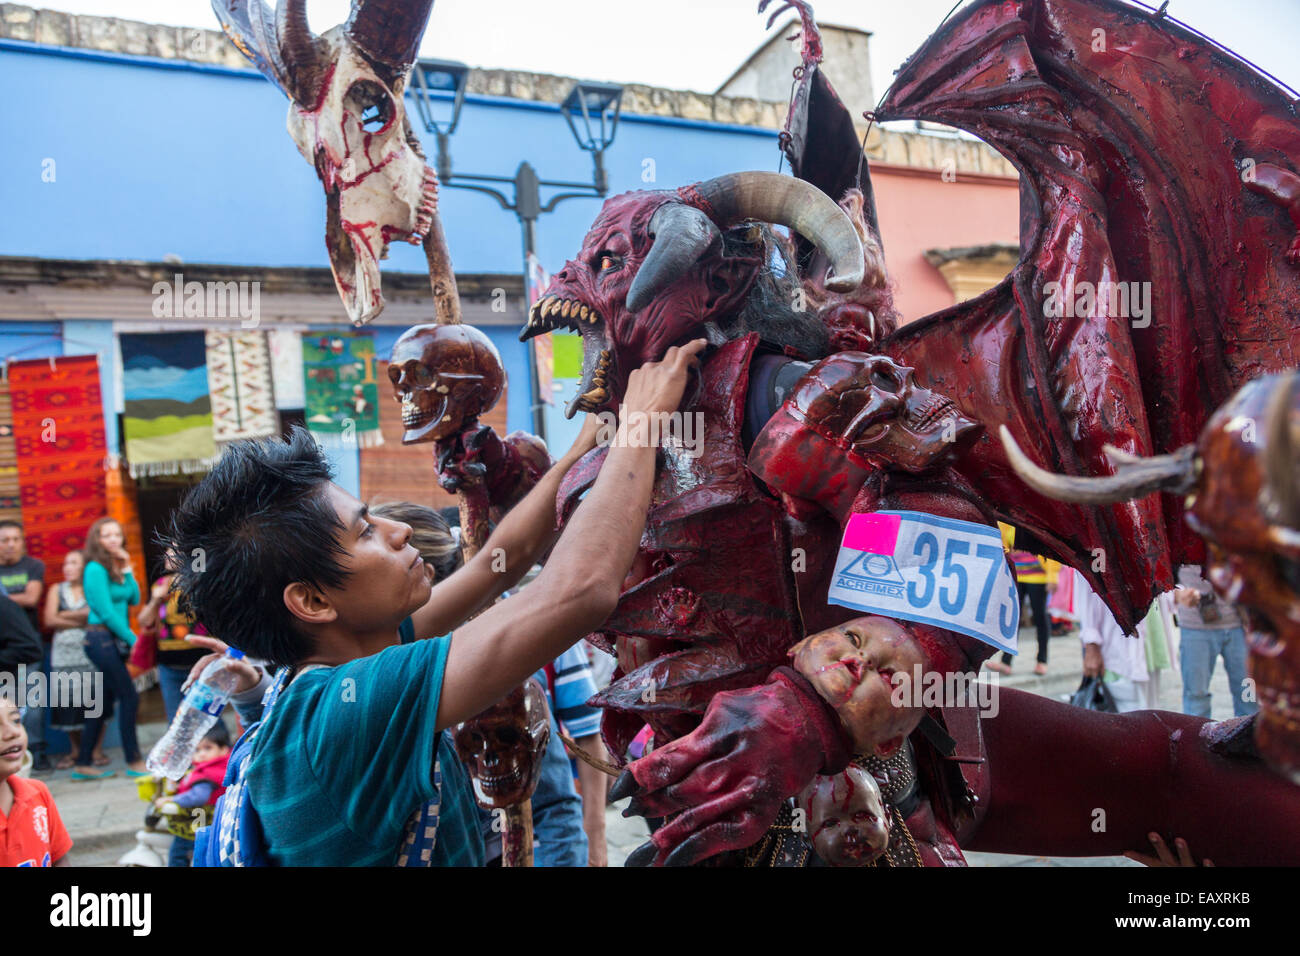 Man dressed in an American style devil costume during the Day of the Dead Festival known in spanish as D’a de Muertos on October 25, 2014 in Oaxaca, Mexico. Stock Photo